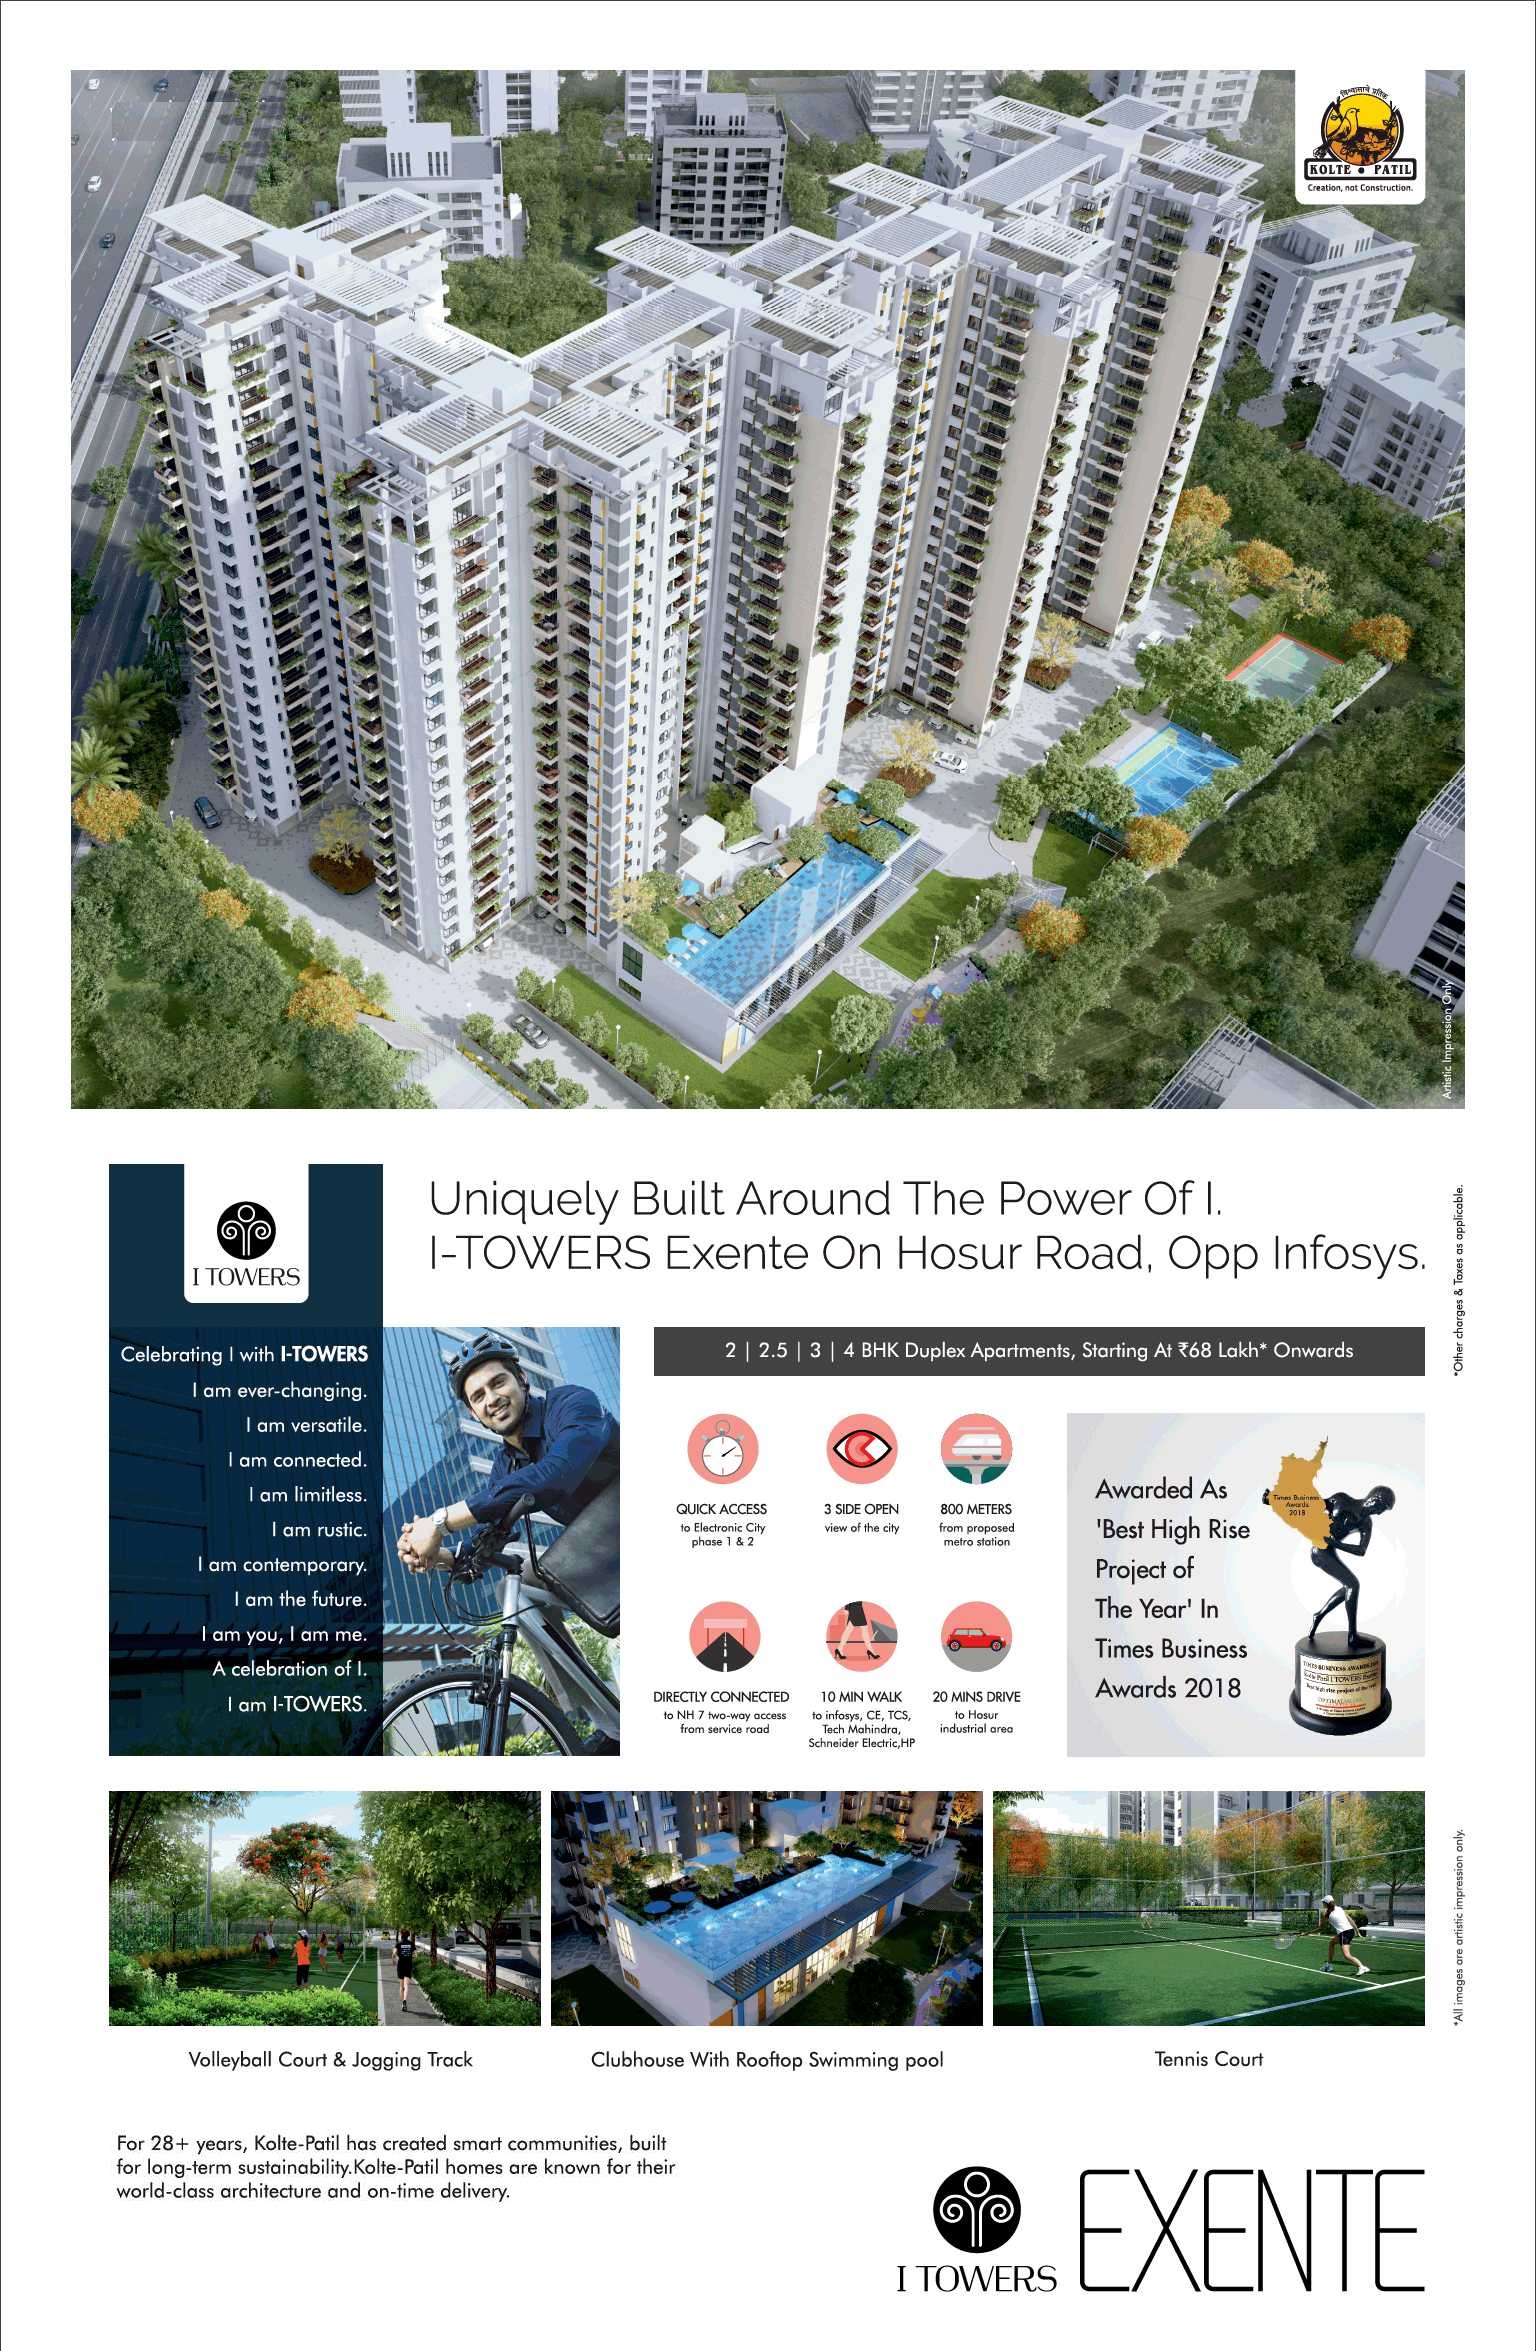 Book duplex apartments @ Rs.68 lakhs at Kolte Patil I Tower Exente in  Bangalore